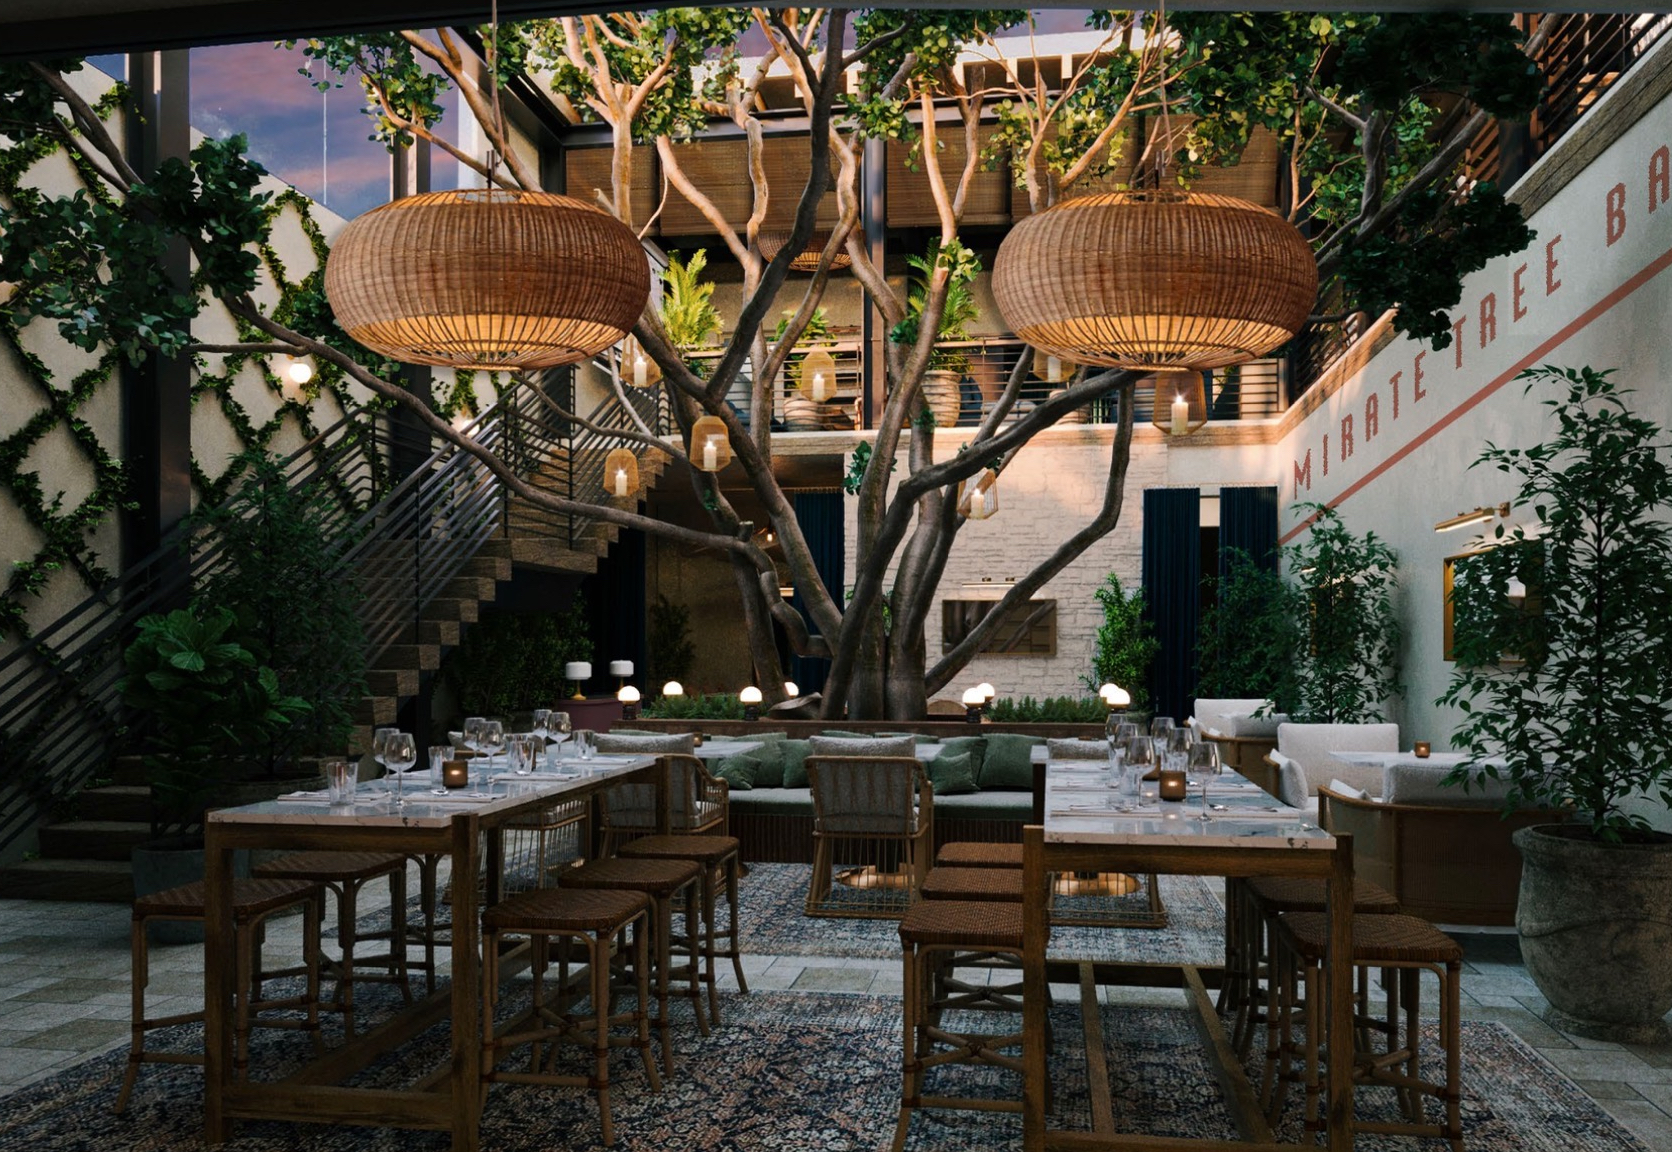 Digital design images for a restaurant with chairs, tables, and a giant tree at the center.